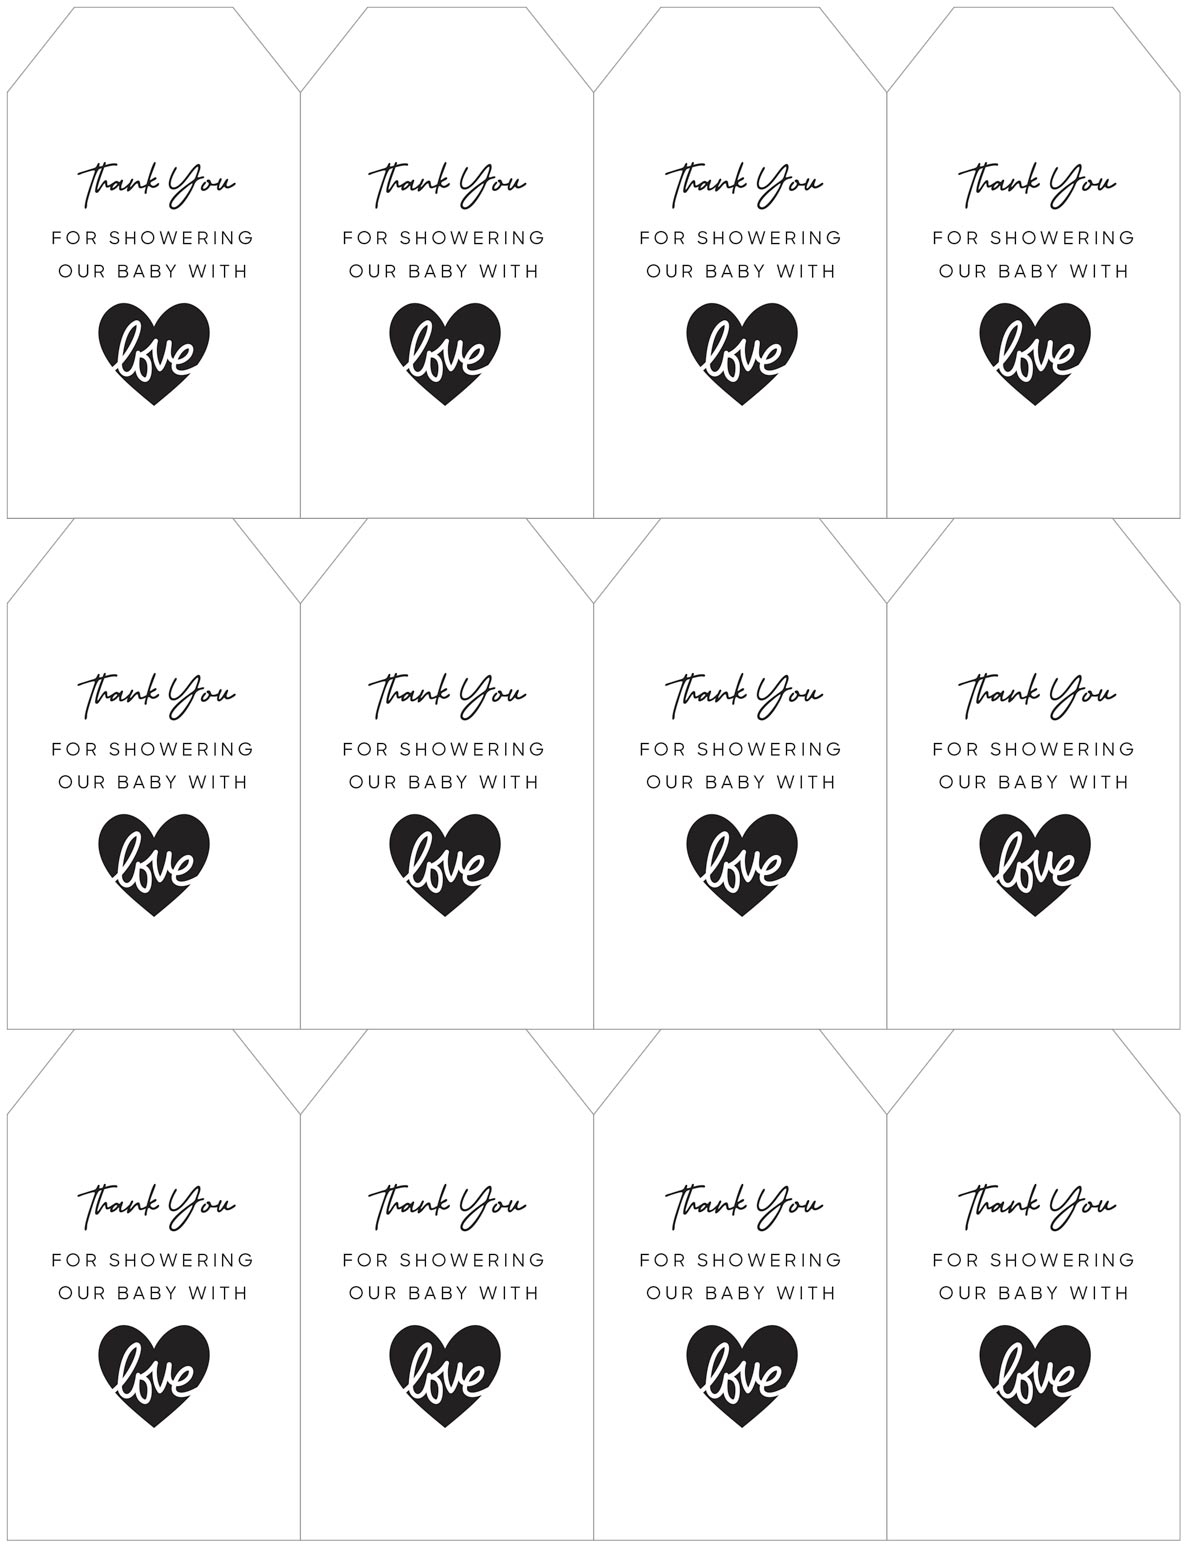 Charming Baby Shower Favor Tags Free Printable For Your Thank You Gifts Skip To My Lou - Free Printable Baby Shower Favor Tags